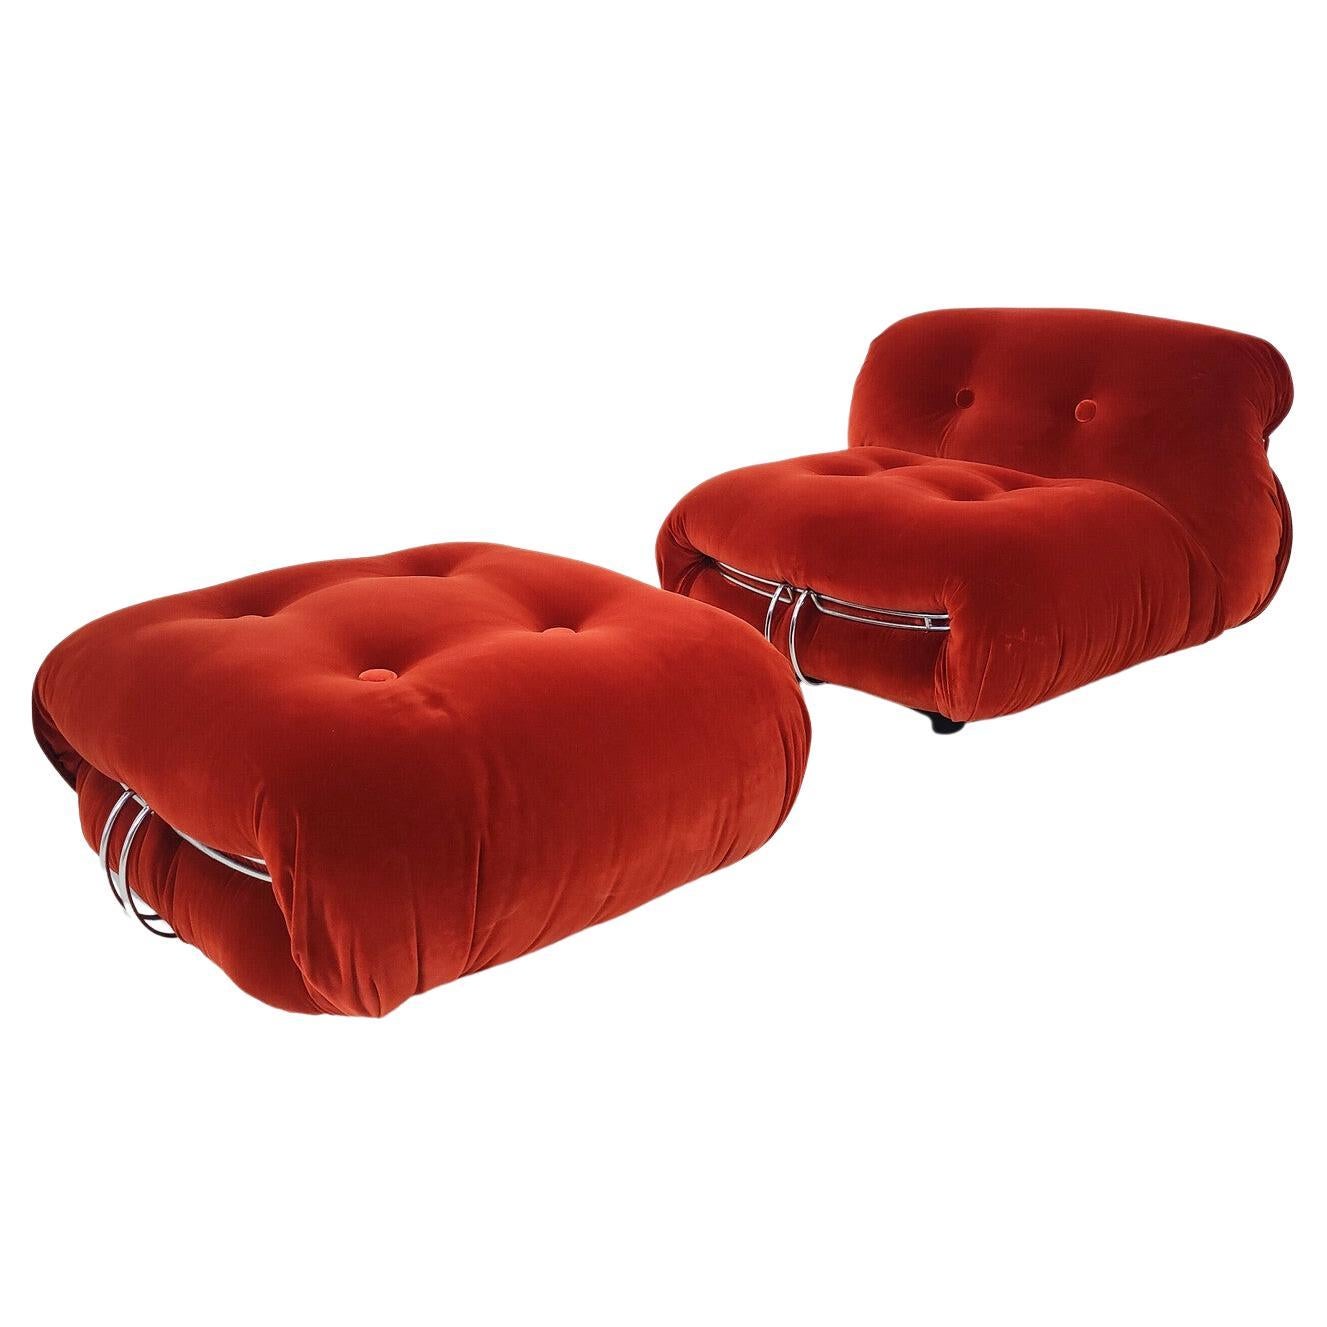 Pair of Midcentury Orange "Soriana" Lounge Chair and Ottoman For Sale